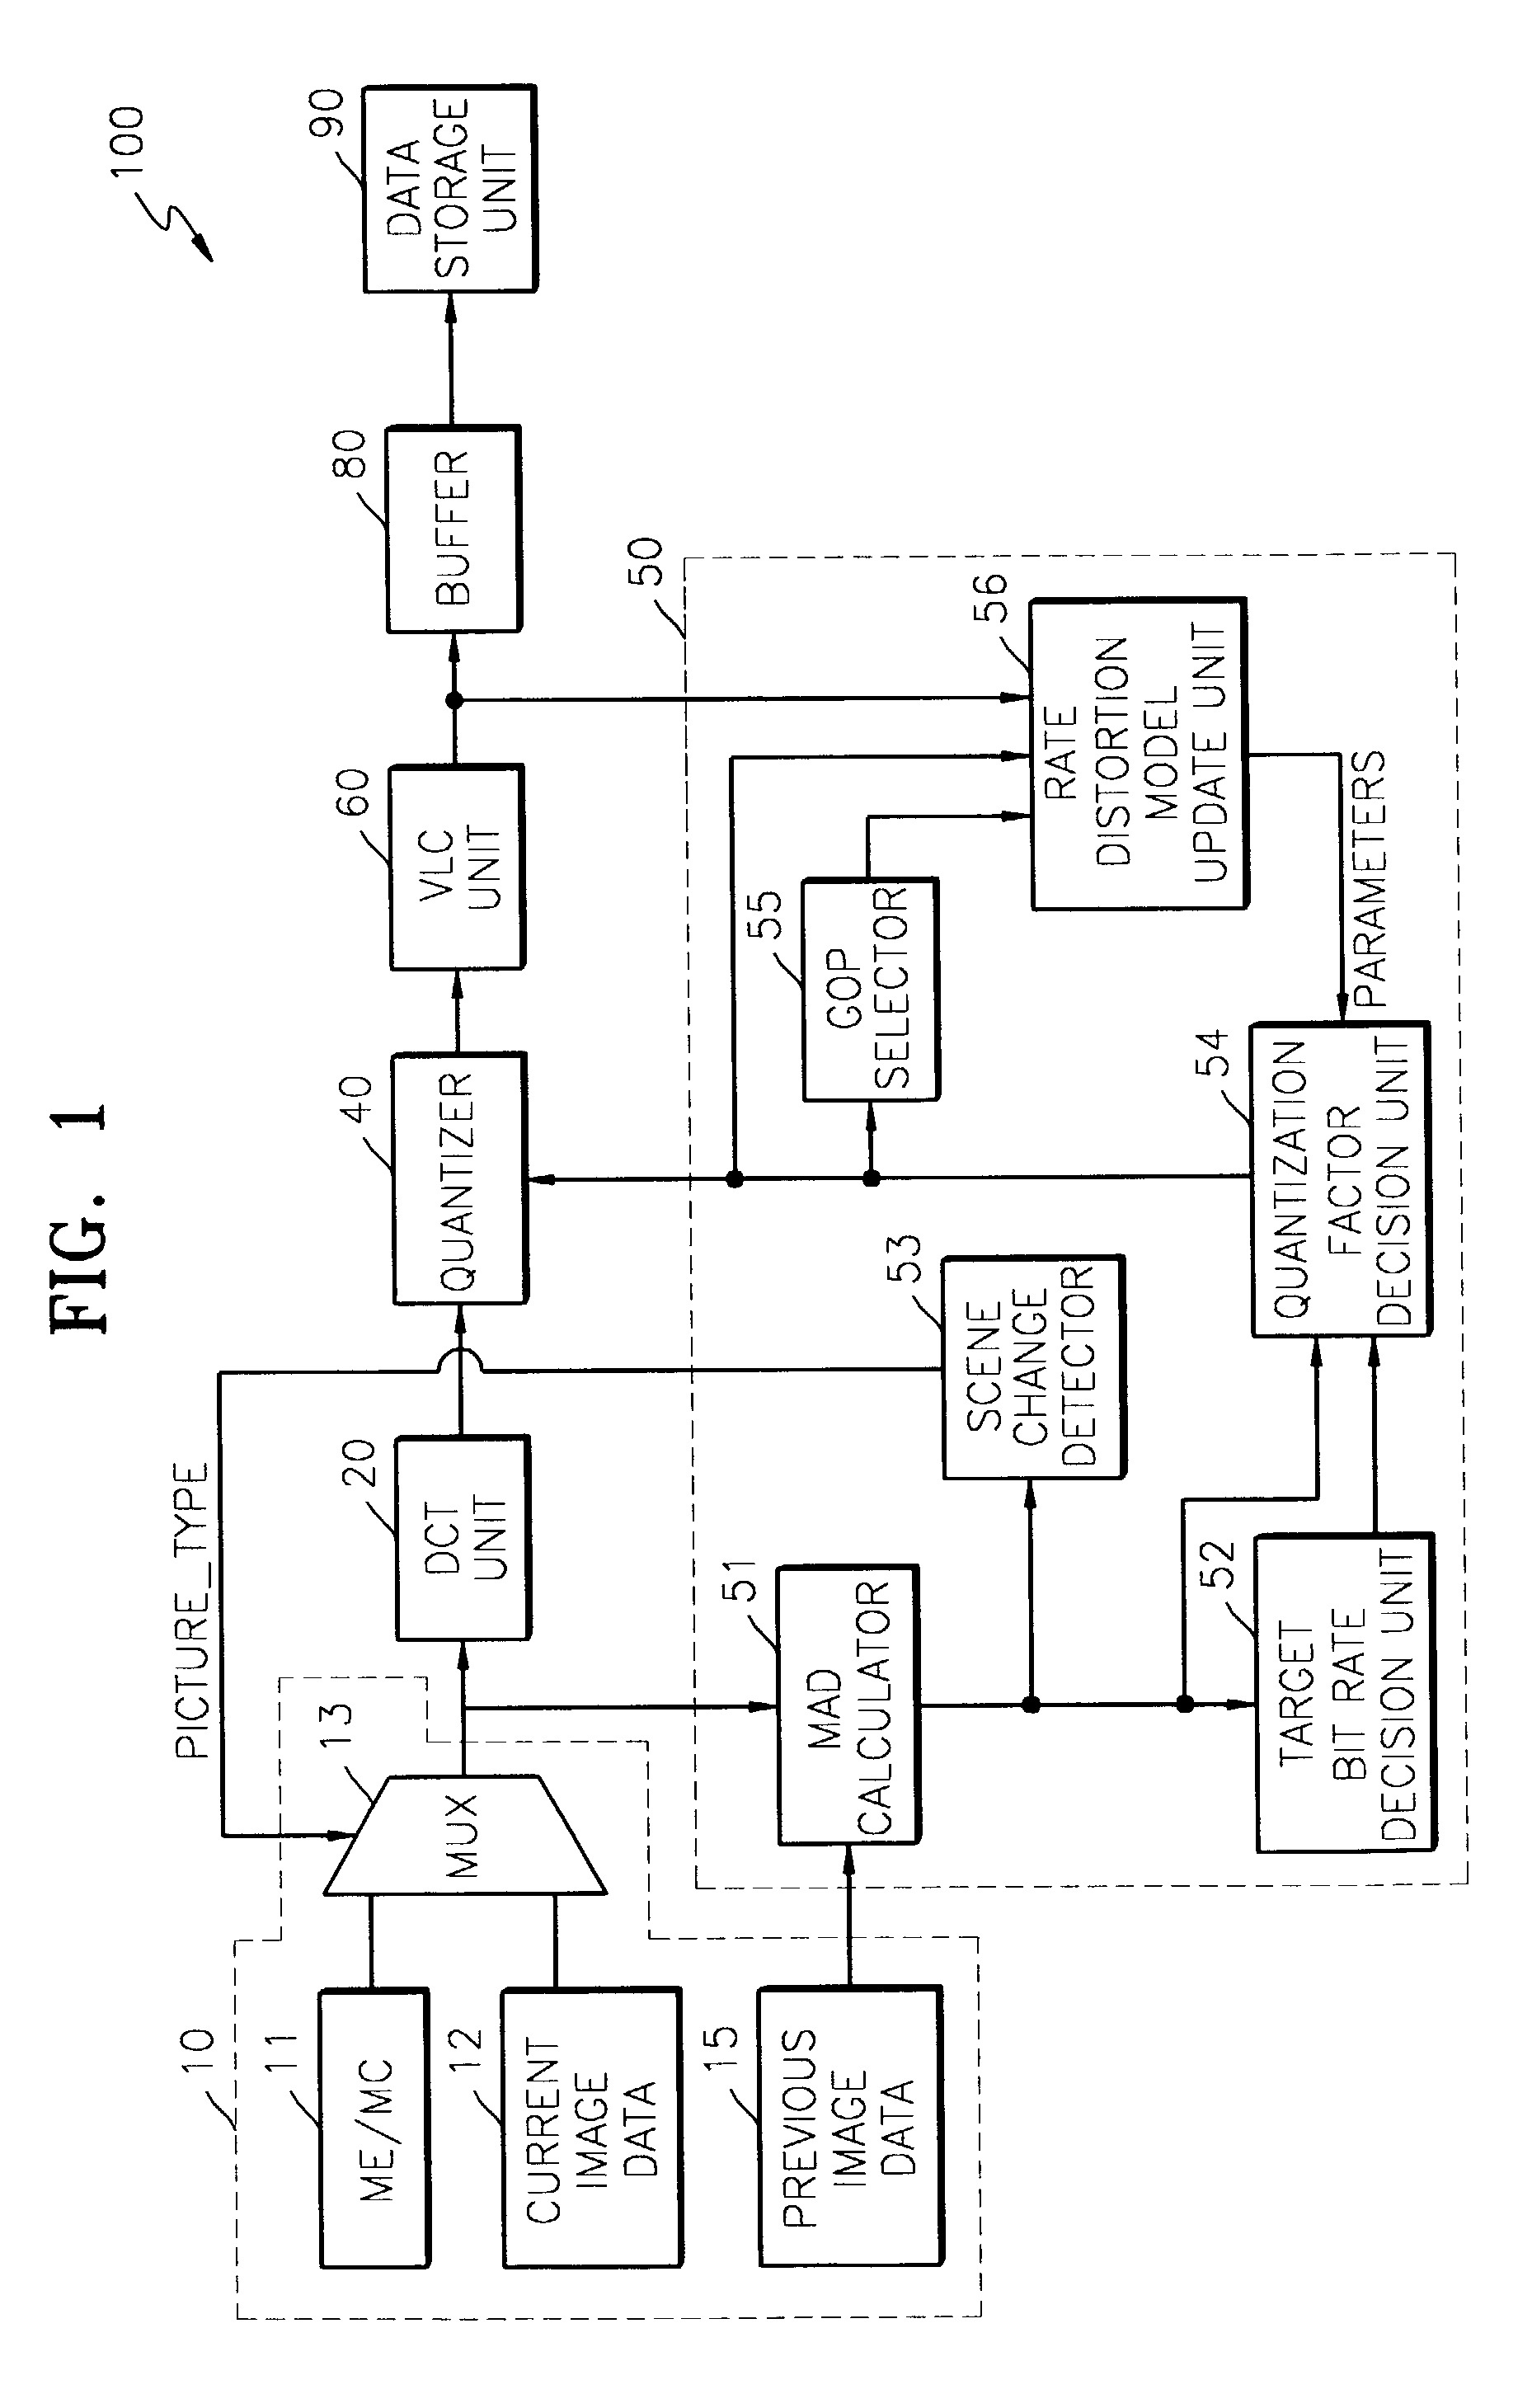 Apparatus and method for controlling variable bit rate in real time